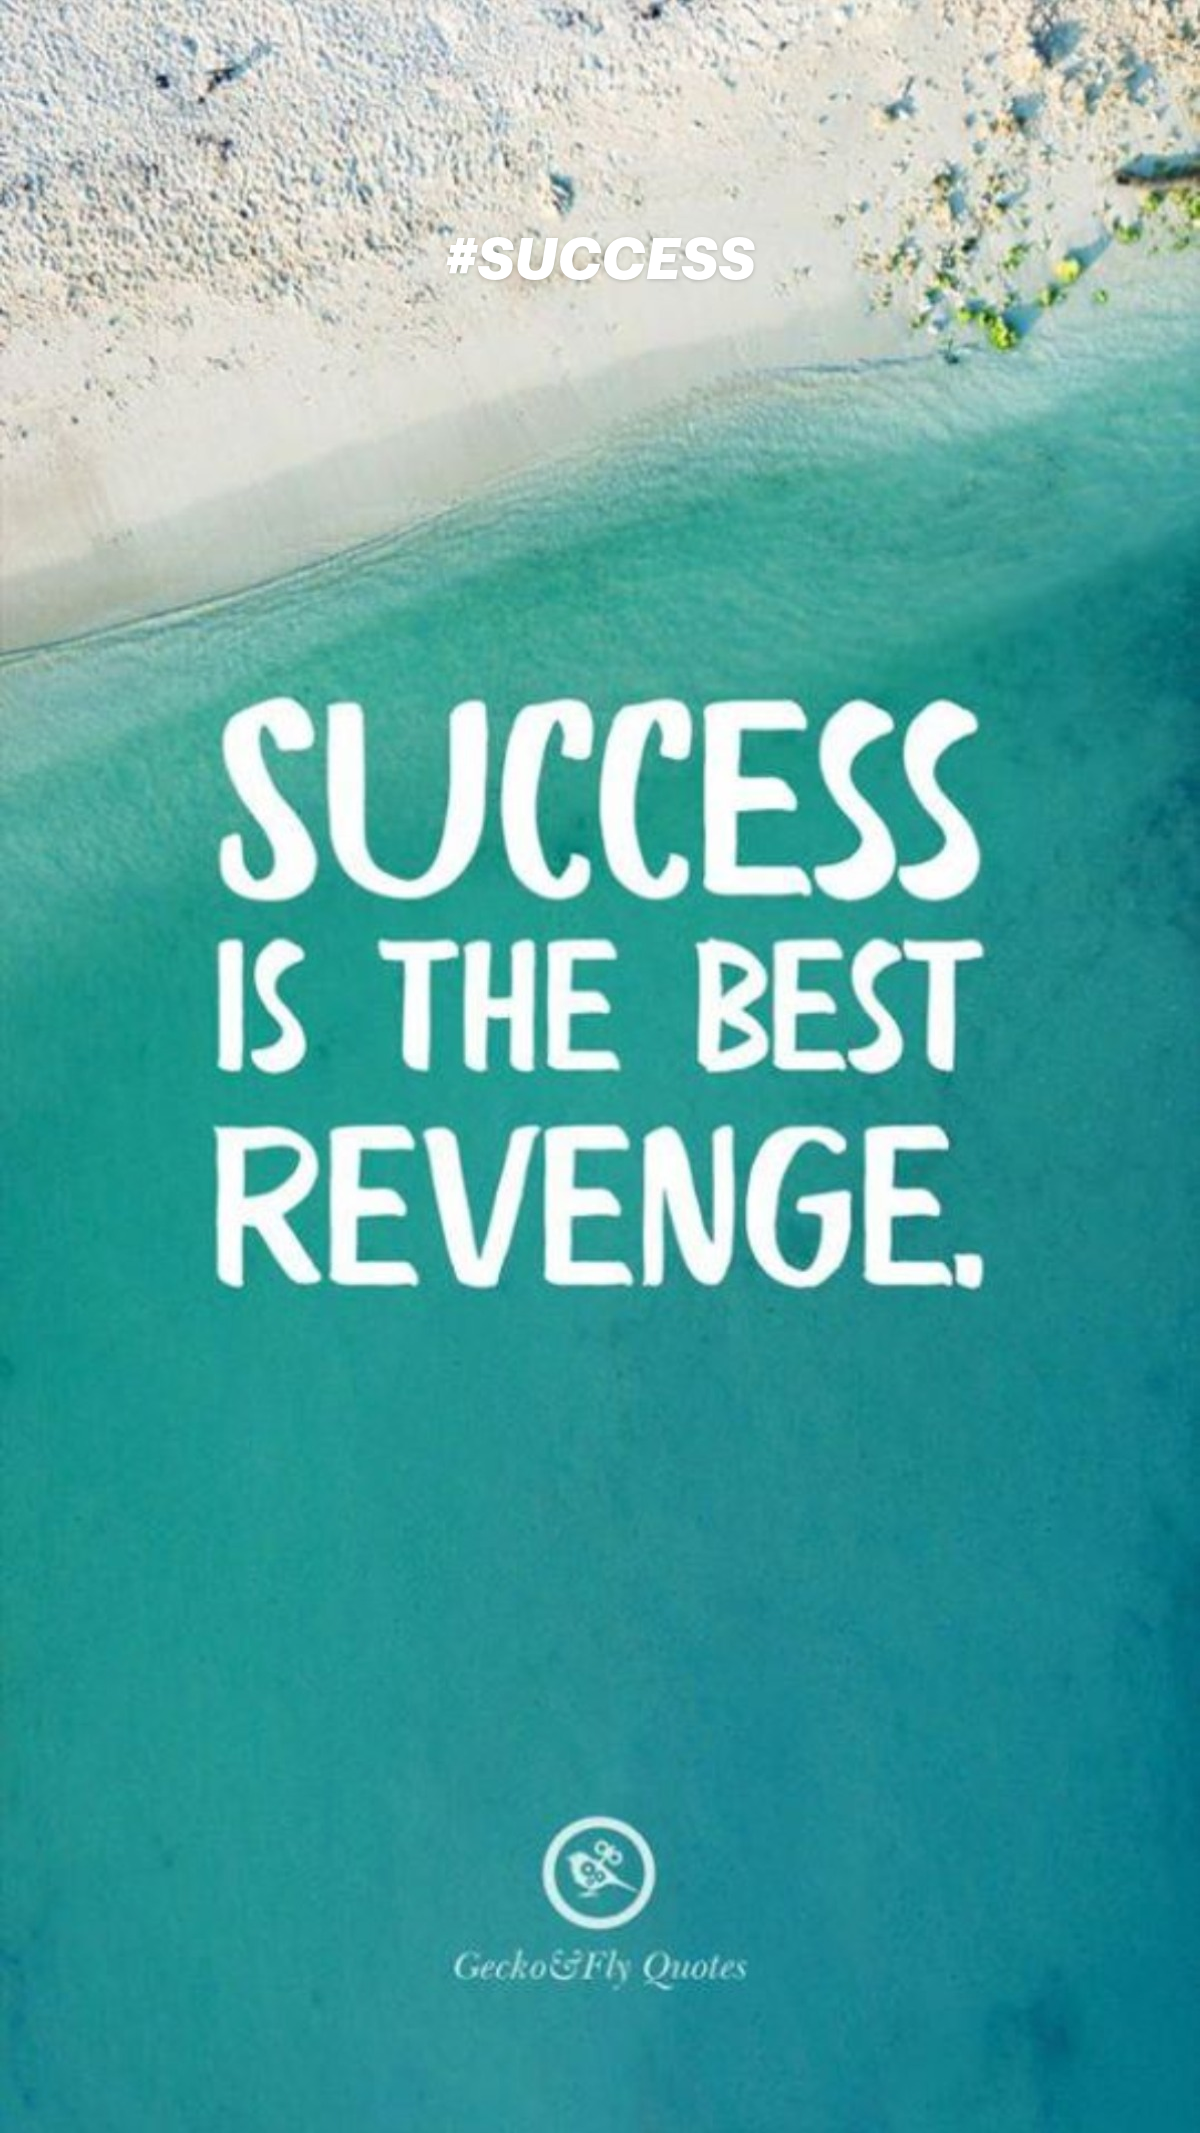 revenge quotes wallpapers